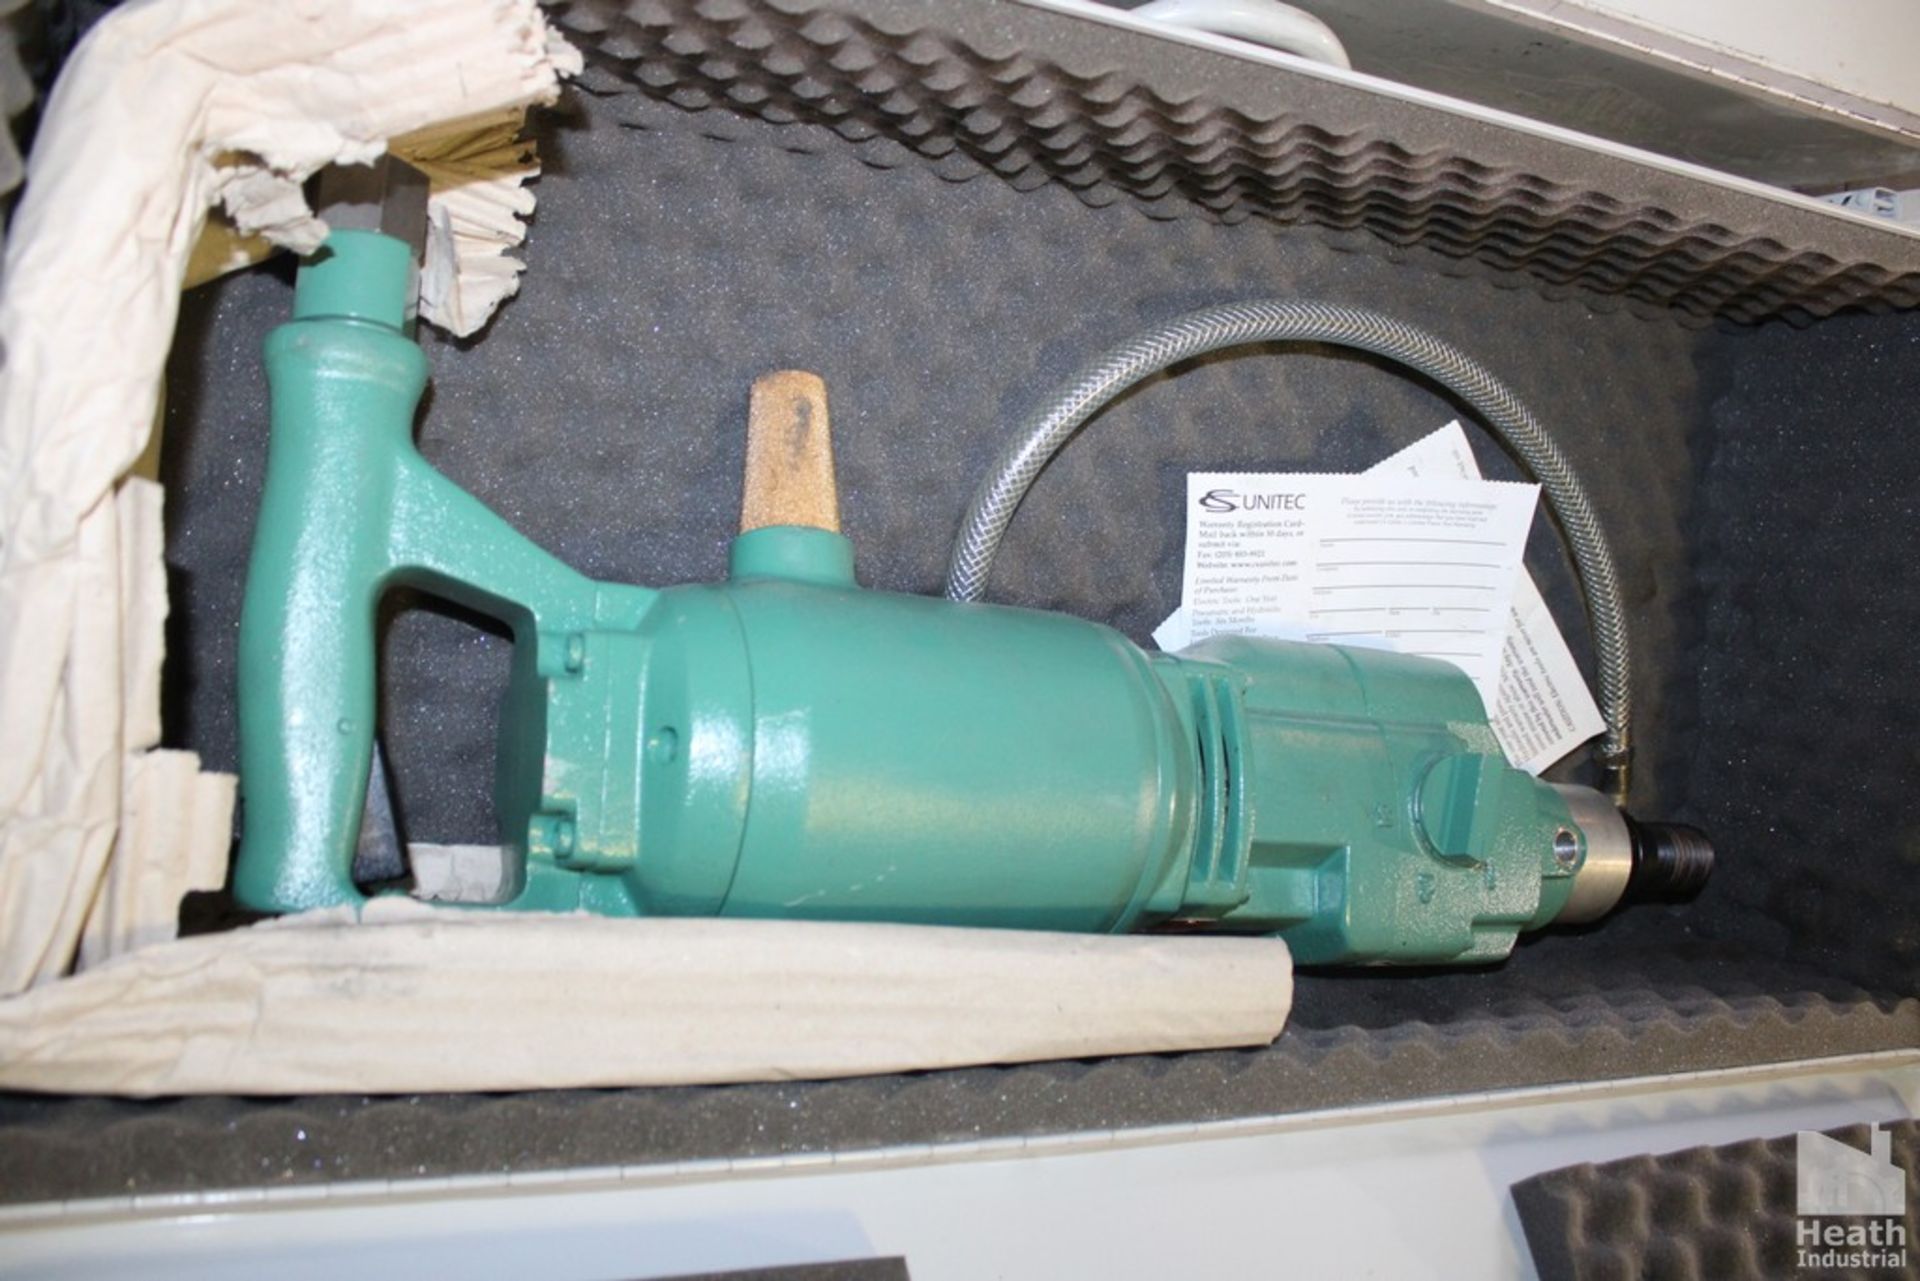 SPITZNAS MODEL 21335 10 PNEUMATIC CORE DRILL WITH CASE - Image 2 of 3